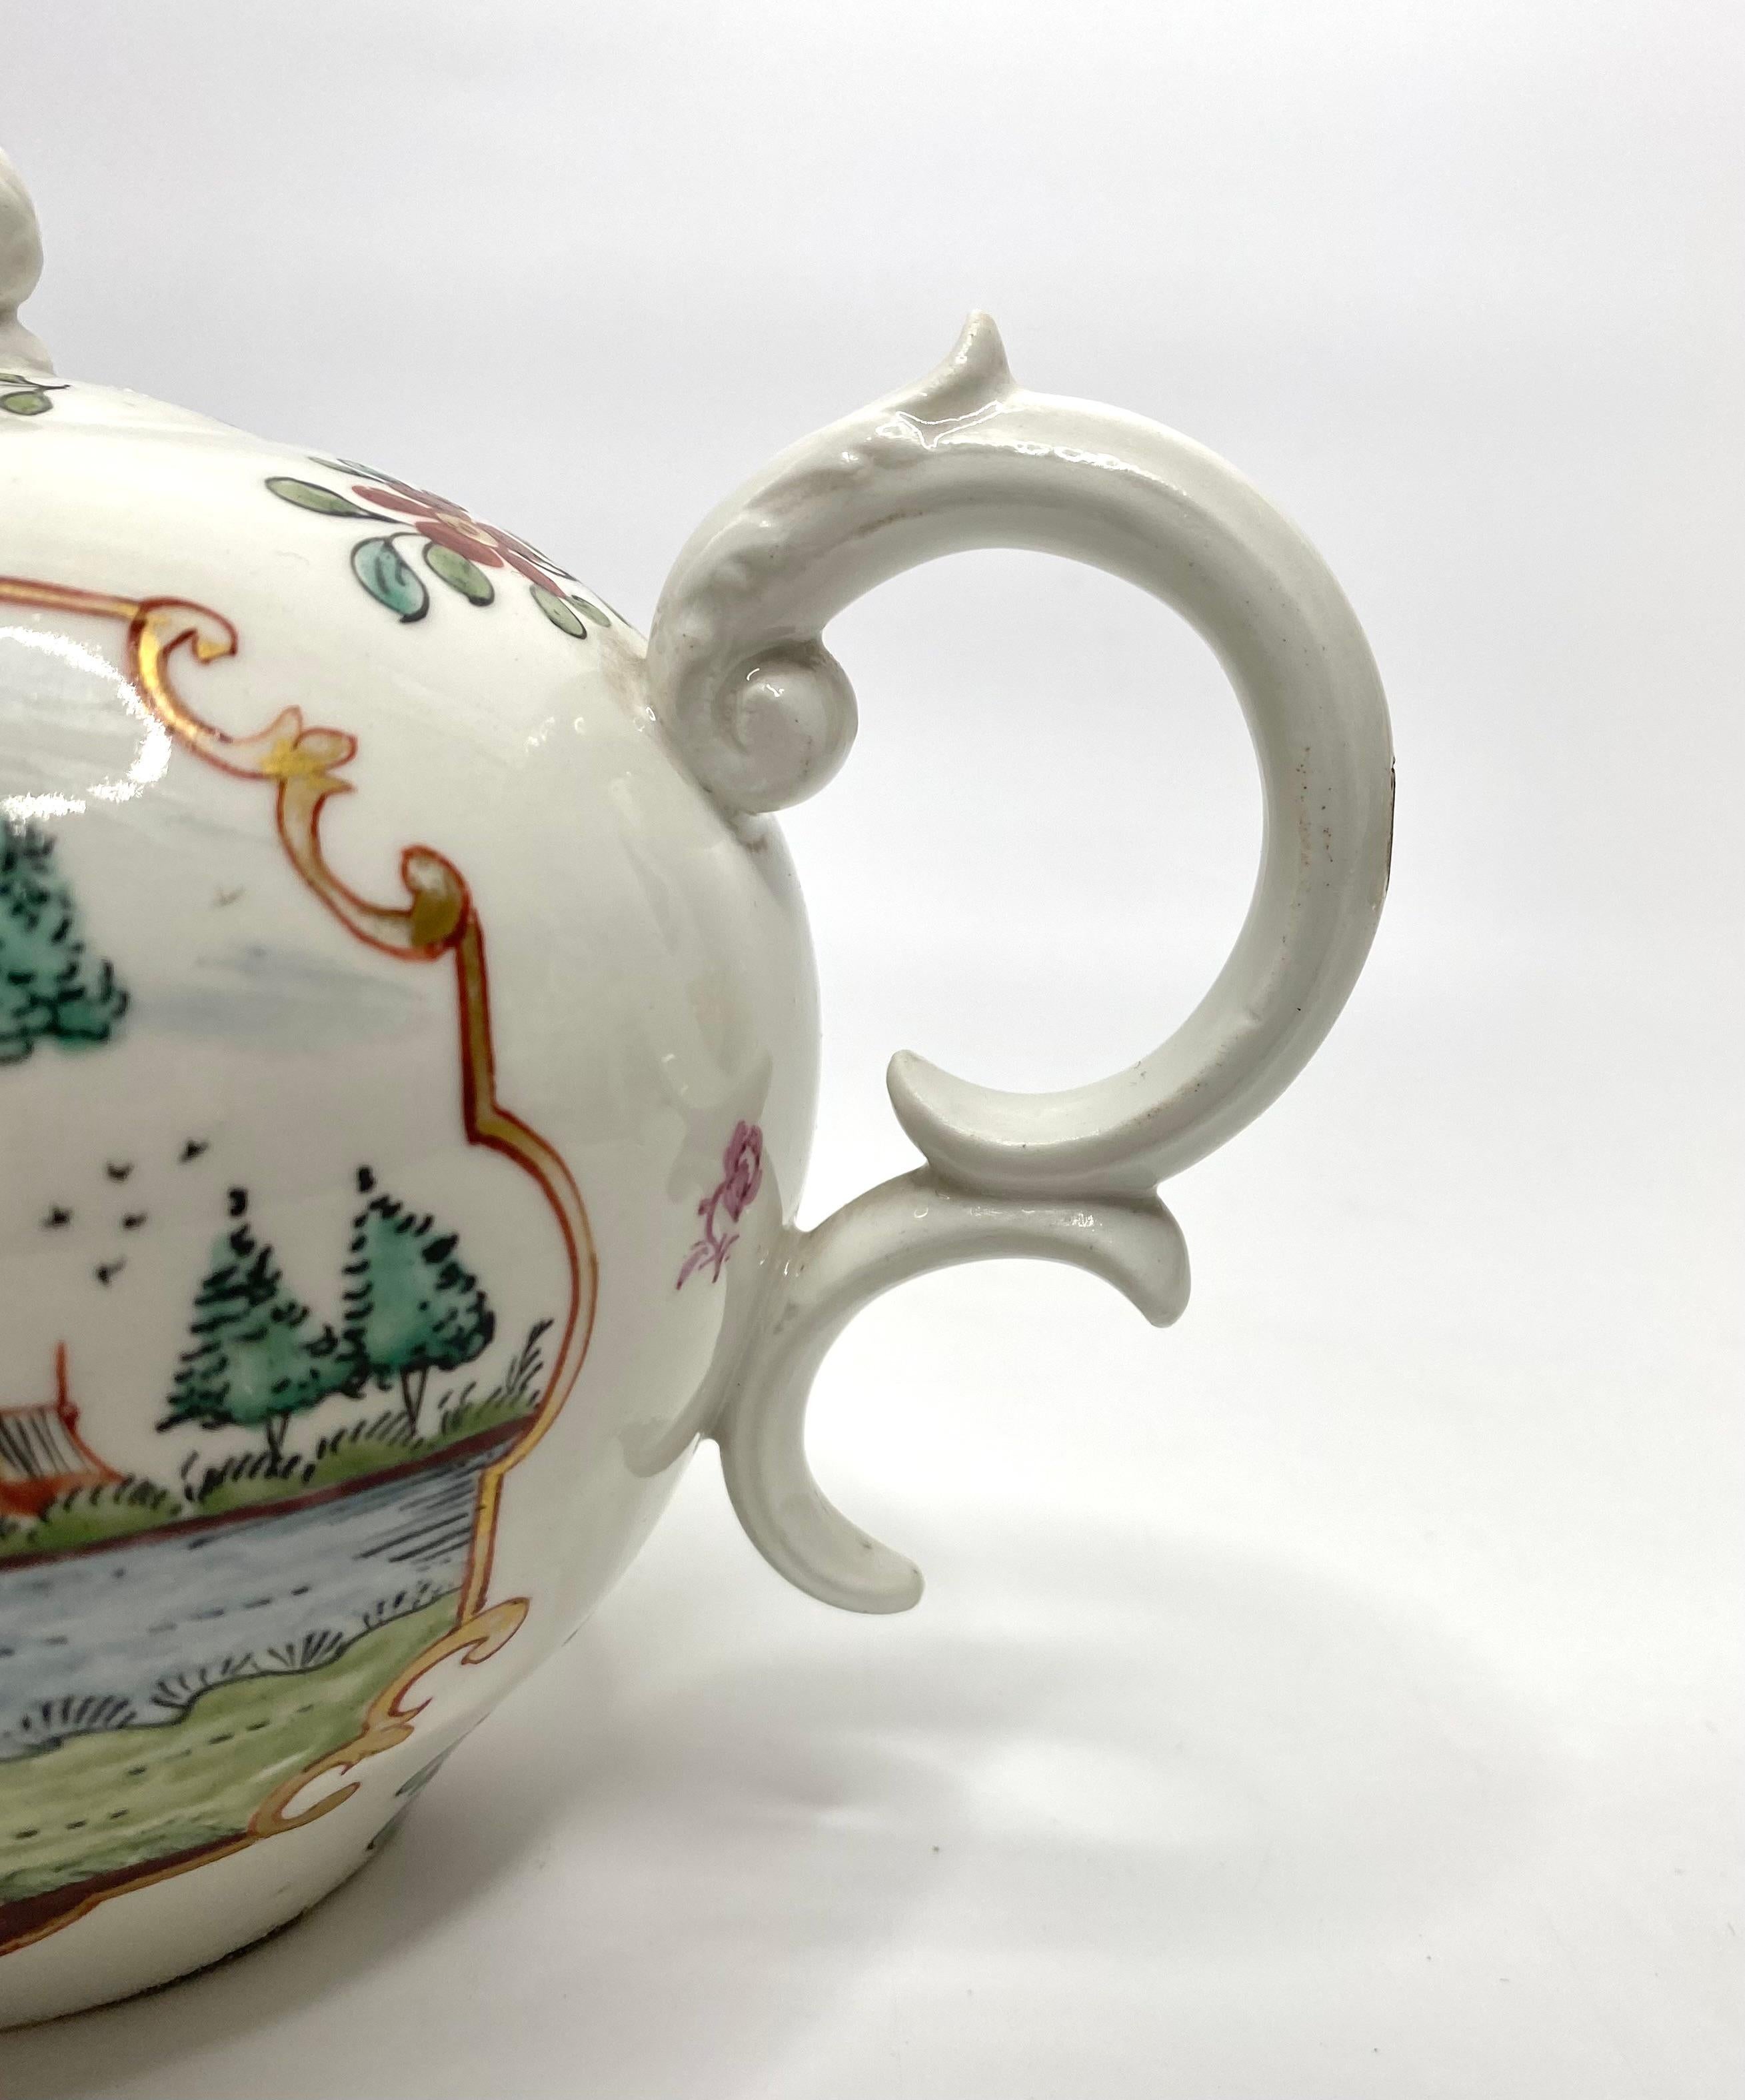 Fired Hochst porcelain teapot & cover, c. 1755. For Sale